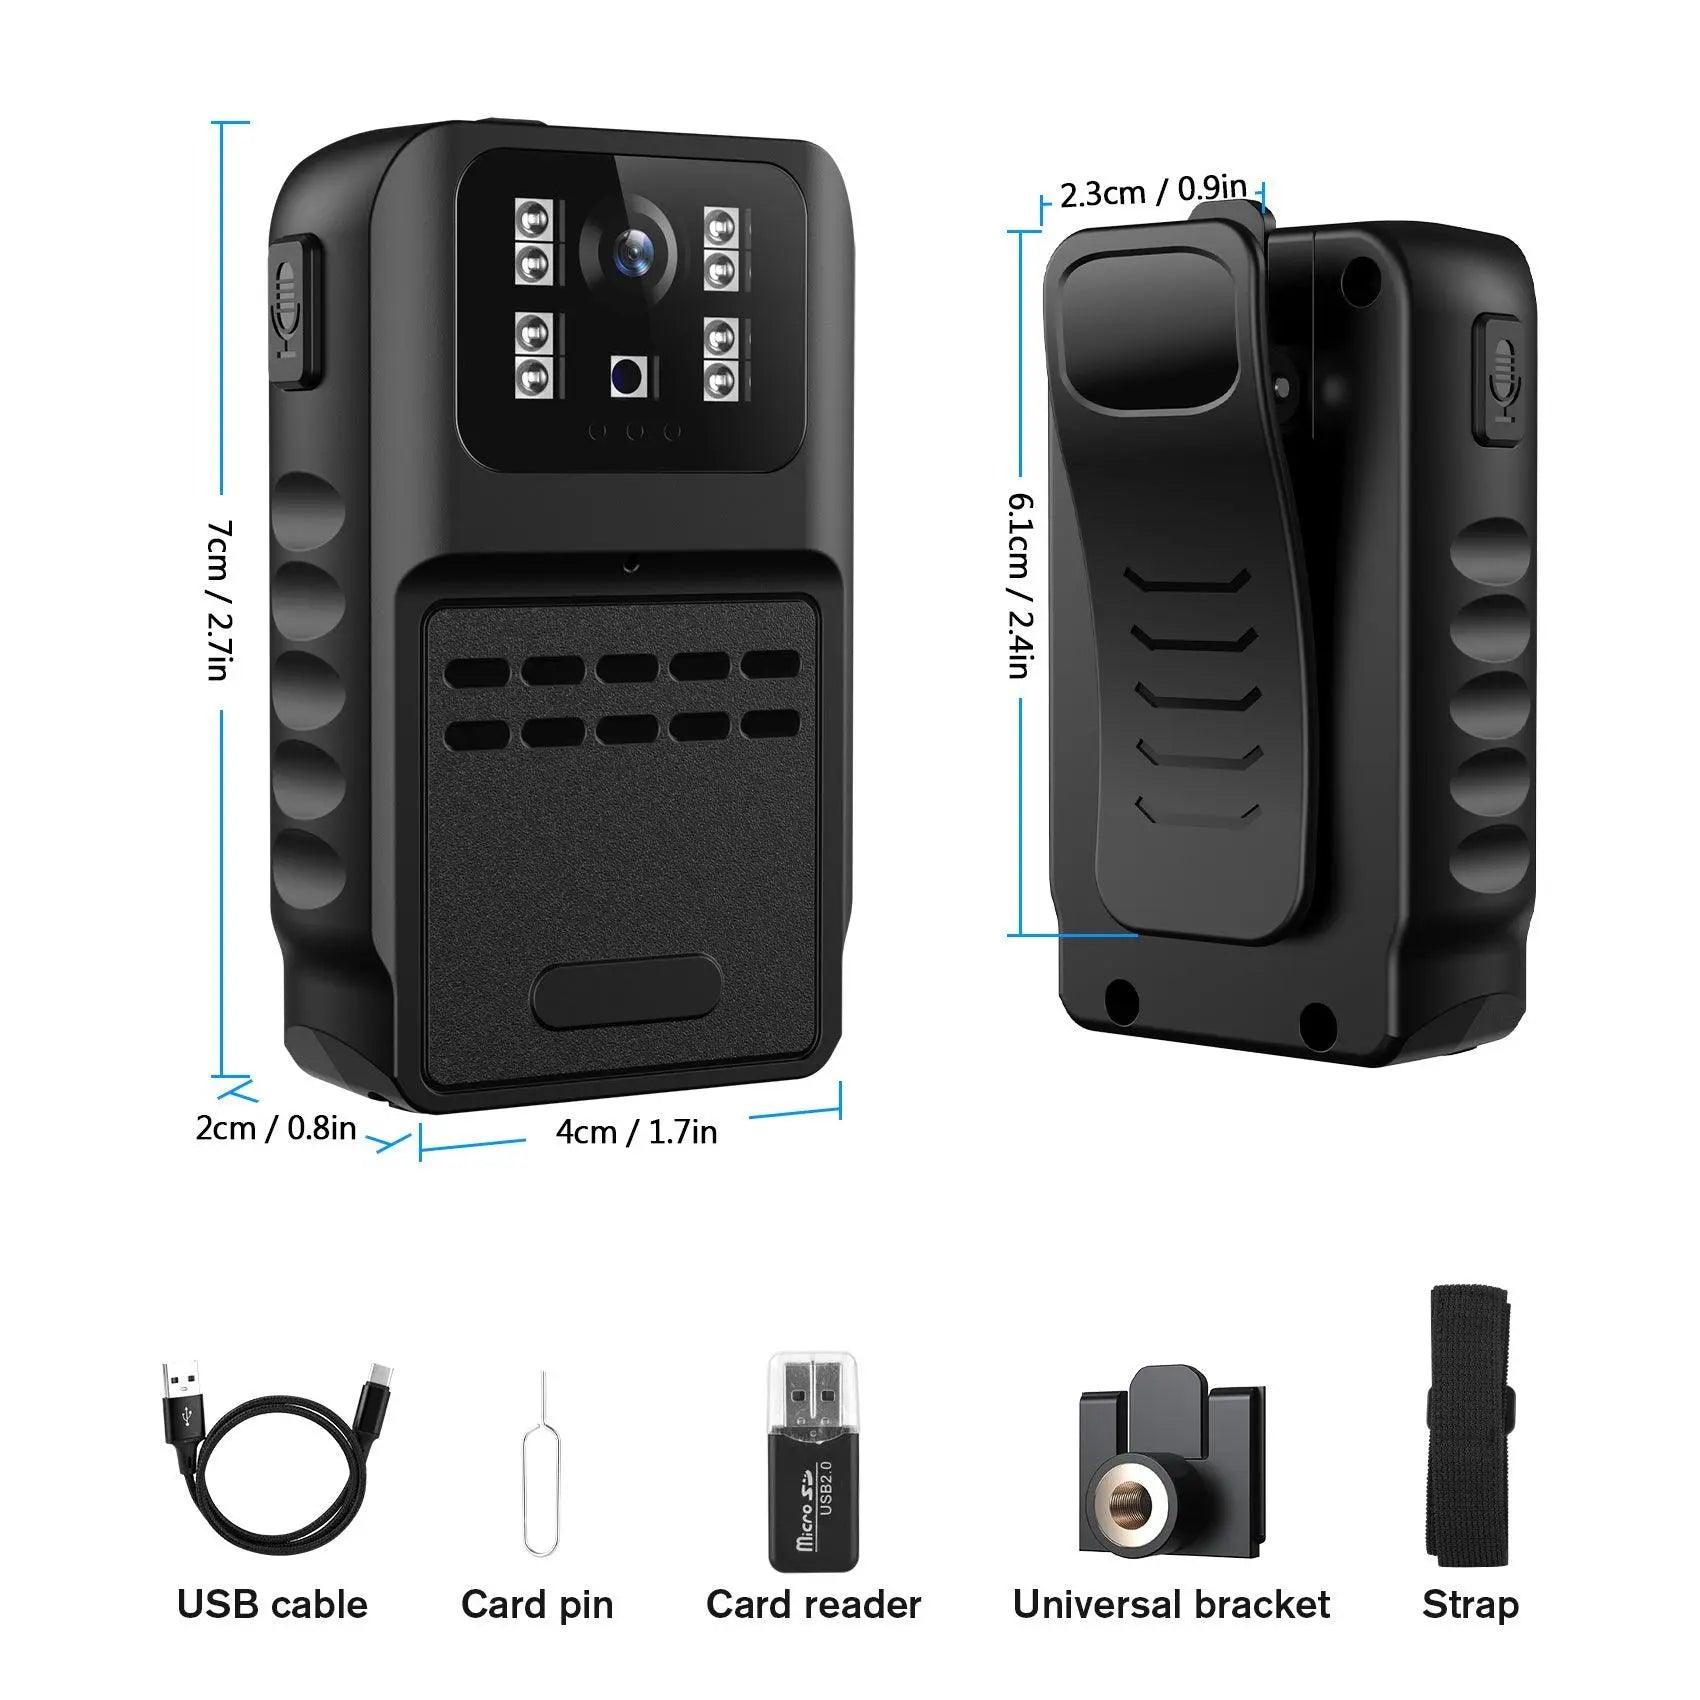 WIFI Mini Body Cameras with Audio and Video Recording with APP Remote Control - Swayfer Tech